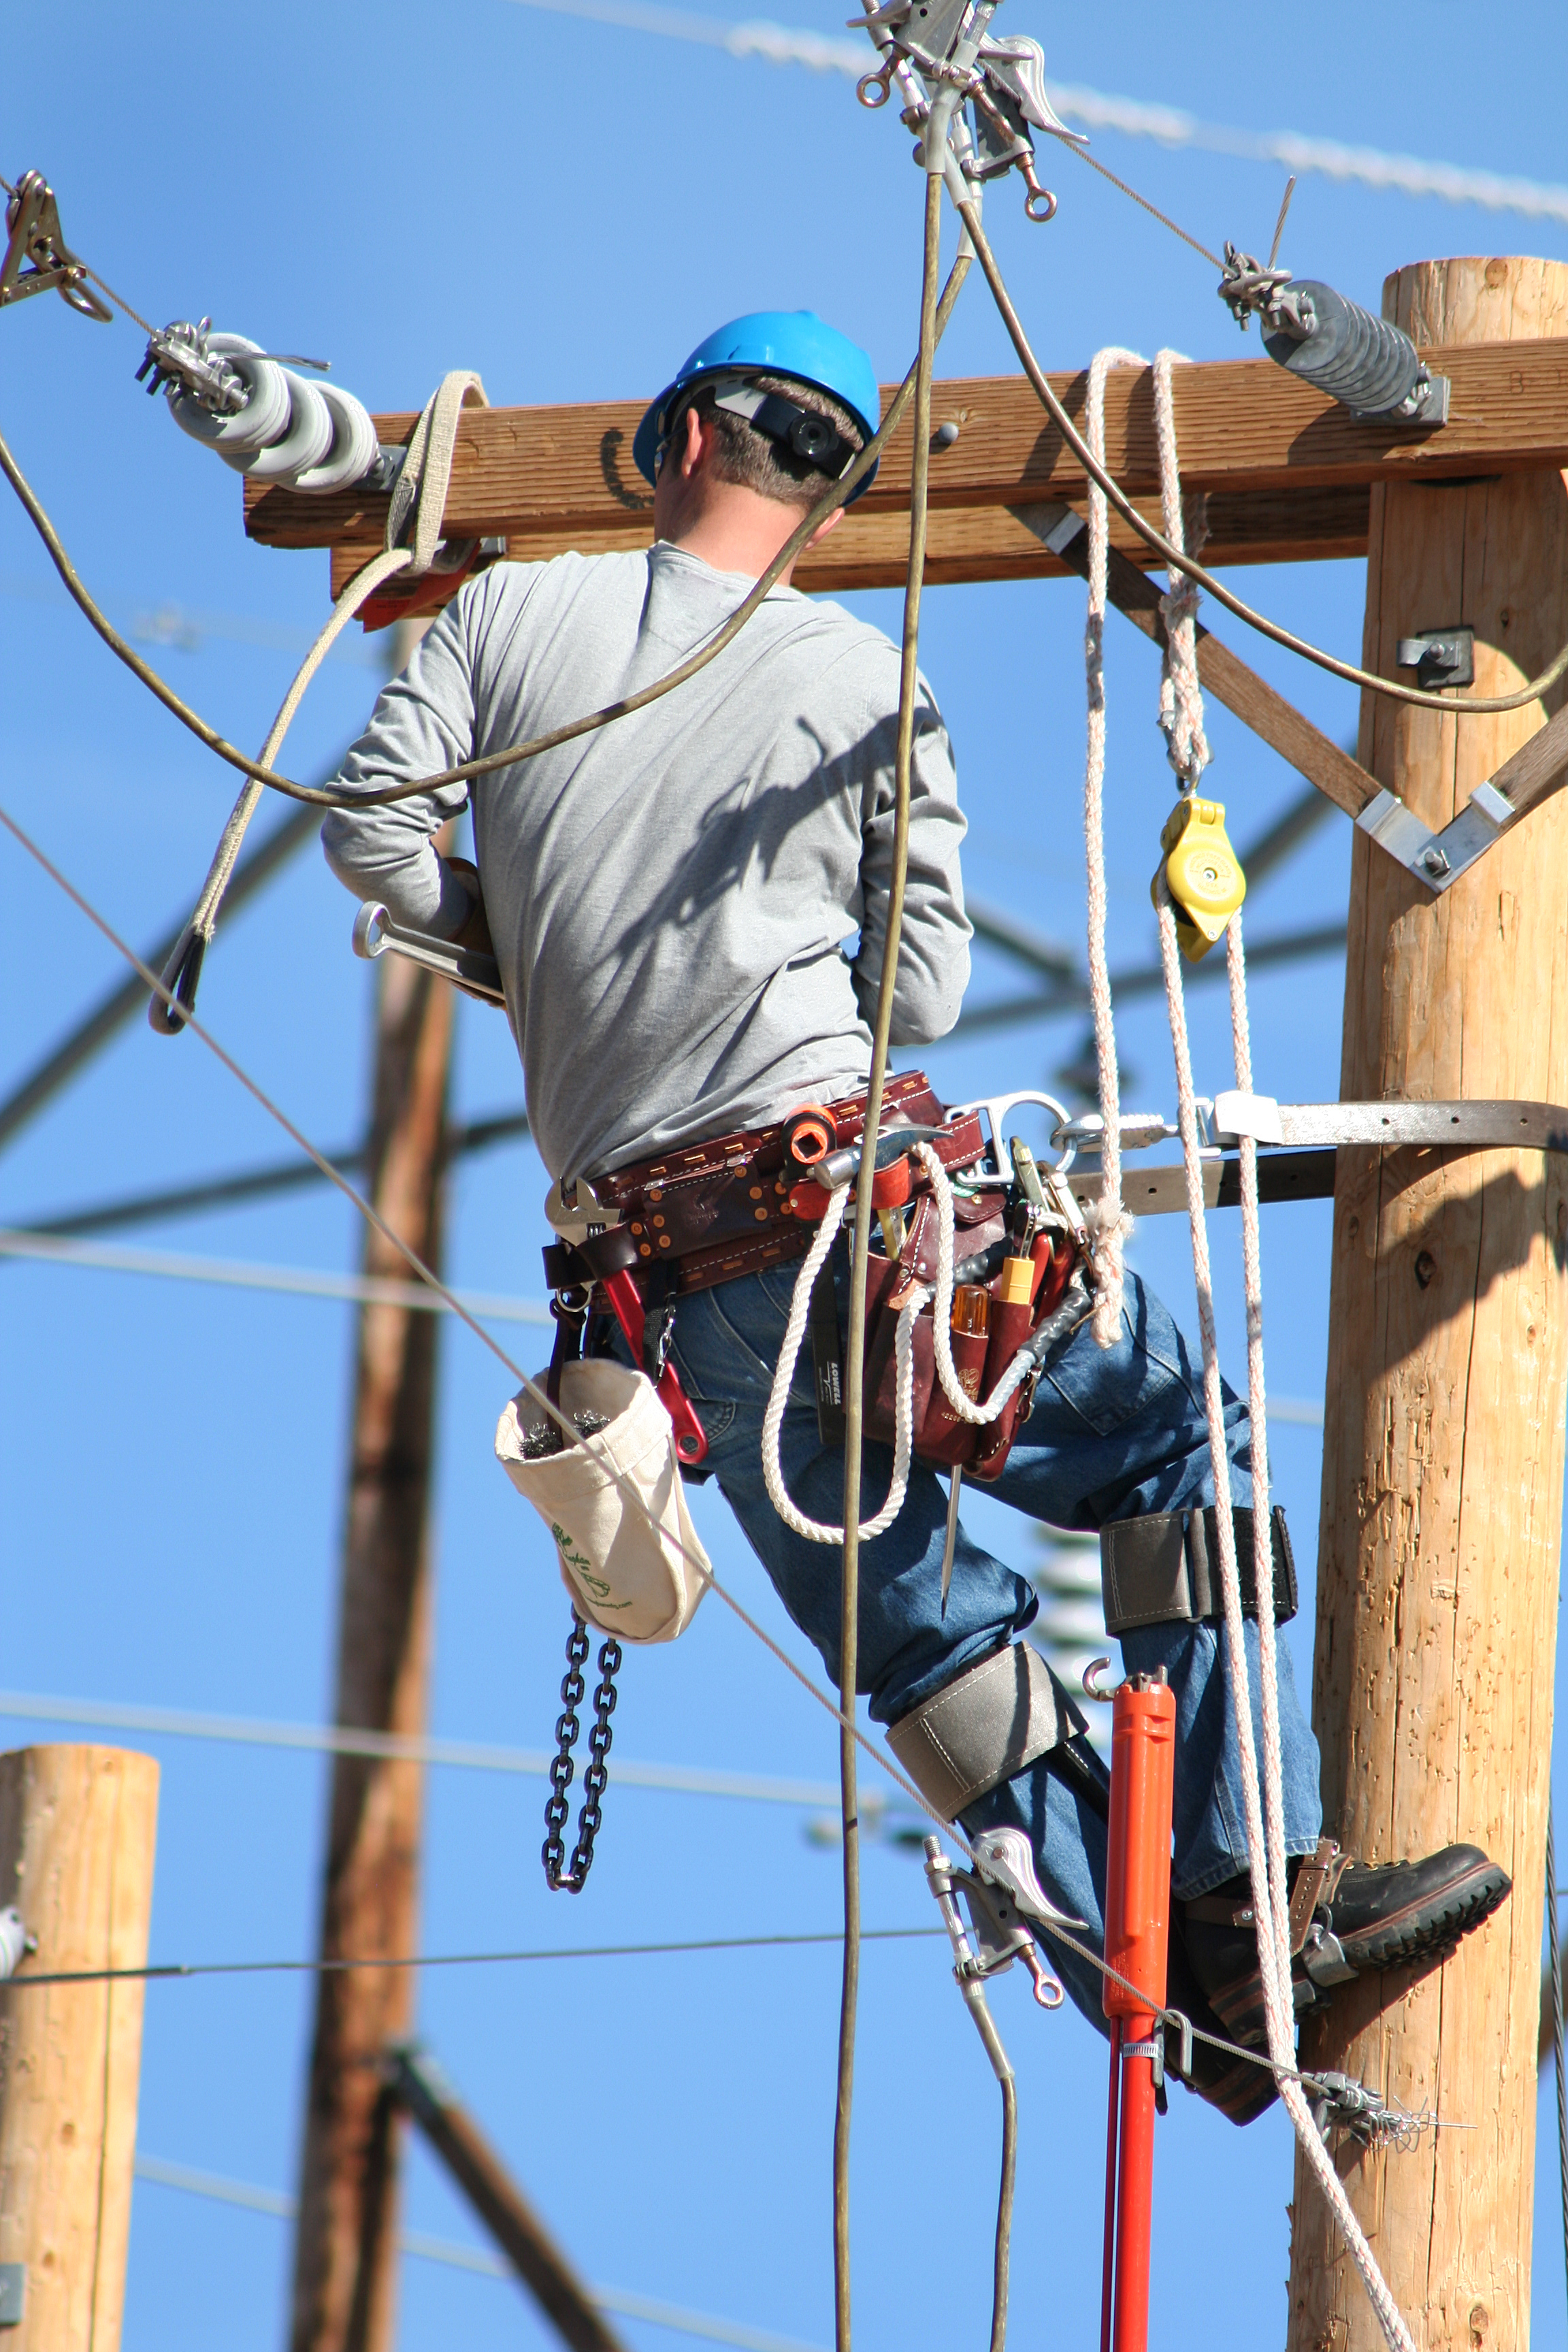 Pole Workers need Lineman Boots that work well with Climbing Gear